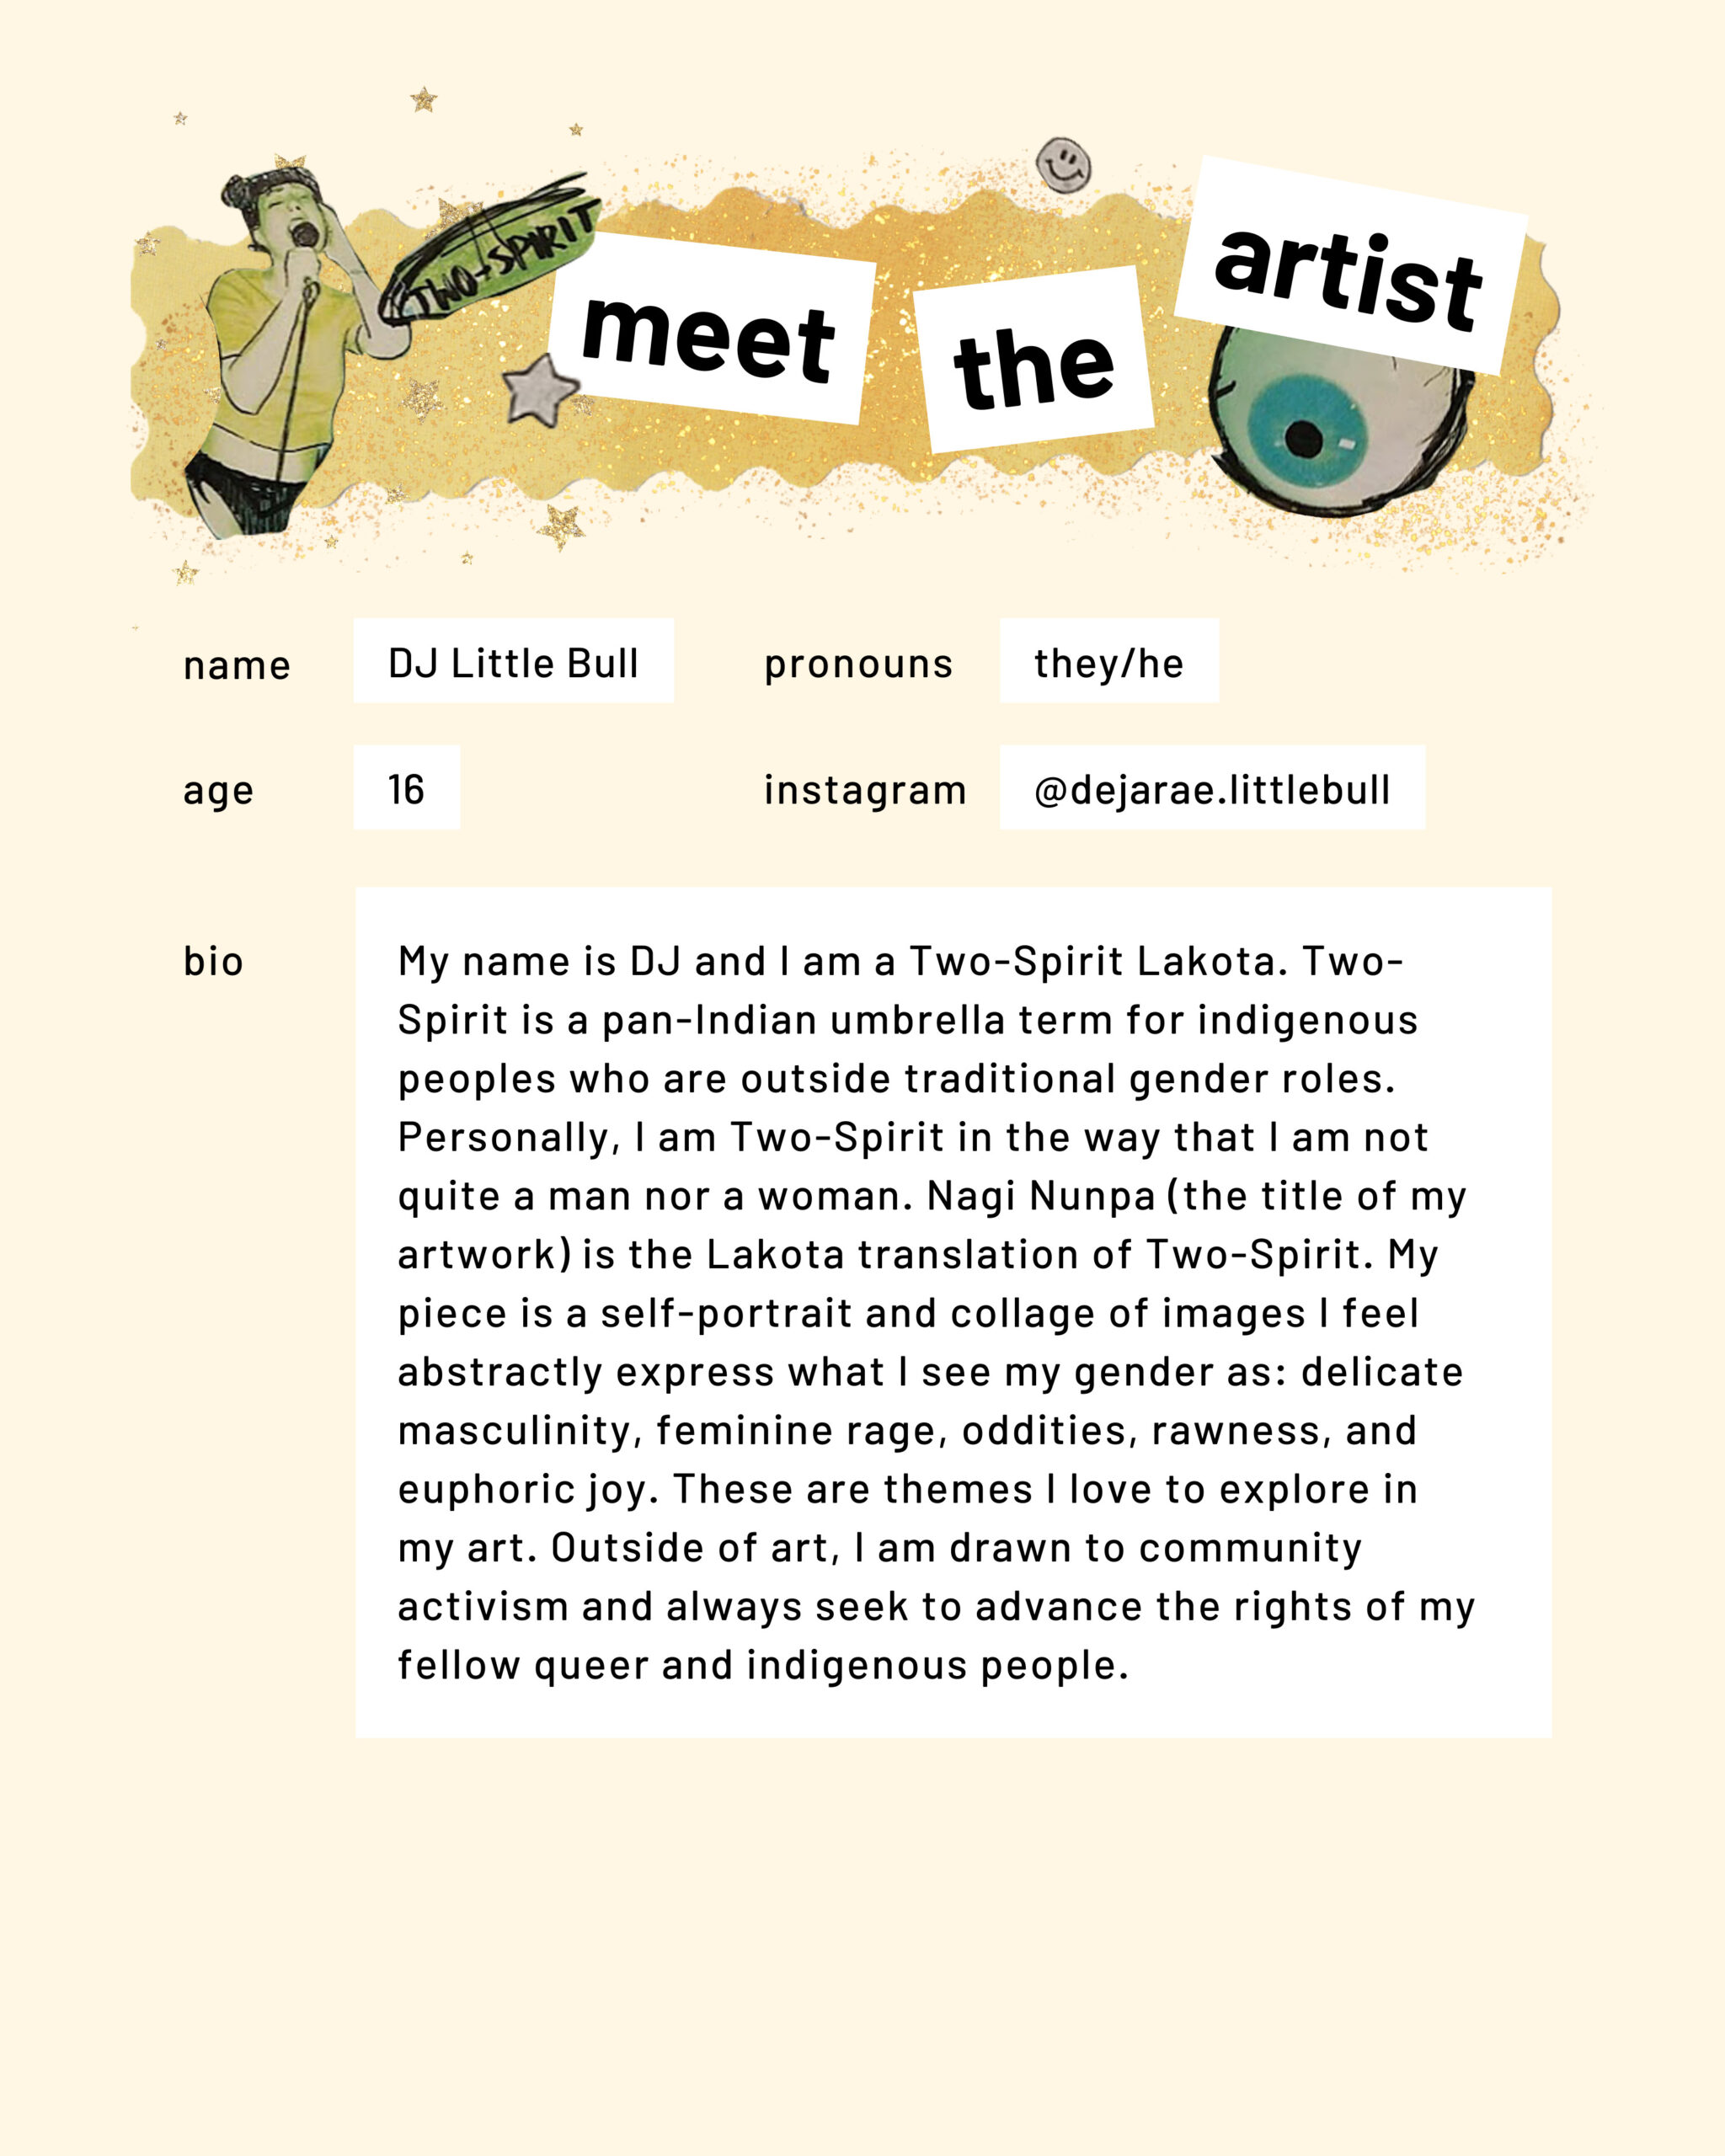 Meet the artist page. Name: DJ Little Bull. Pronouns: they/he. Age: 16. Instagram: dejarae.littlebull. My name is DJ and I am a Two-Spirit Lakota. Two-Spirit is a pan-Indian umbrella term for indigenous peoples who are outside traditional gender roles. Personally, I am Two-Spirit in the way that I am not quite a man nor a woman. Nagi Nunpa (the title of my artwork) is the Lakota translation of Two-Spirit. My piece is a self-portrait and collage of images I feel abstractly express what I see my gender as: delicate masculinity, feminine rage, oddities, rawness, and euphoric joy. These are themes I love to explore in my art. Outside of art, I am drawn to community activism and always seek to advance the rights of my fellow queer and indigenous people.